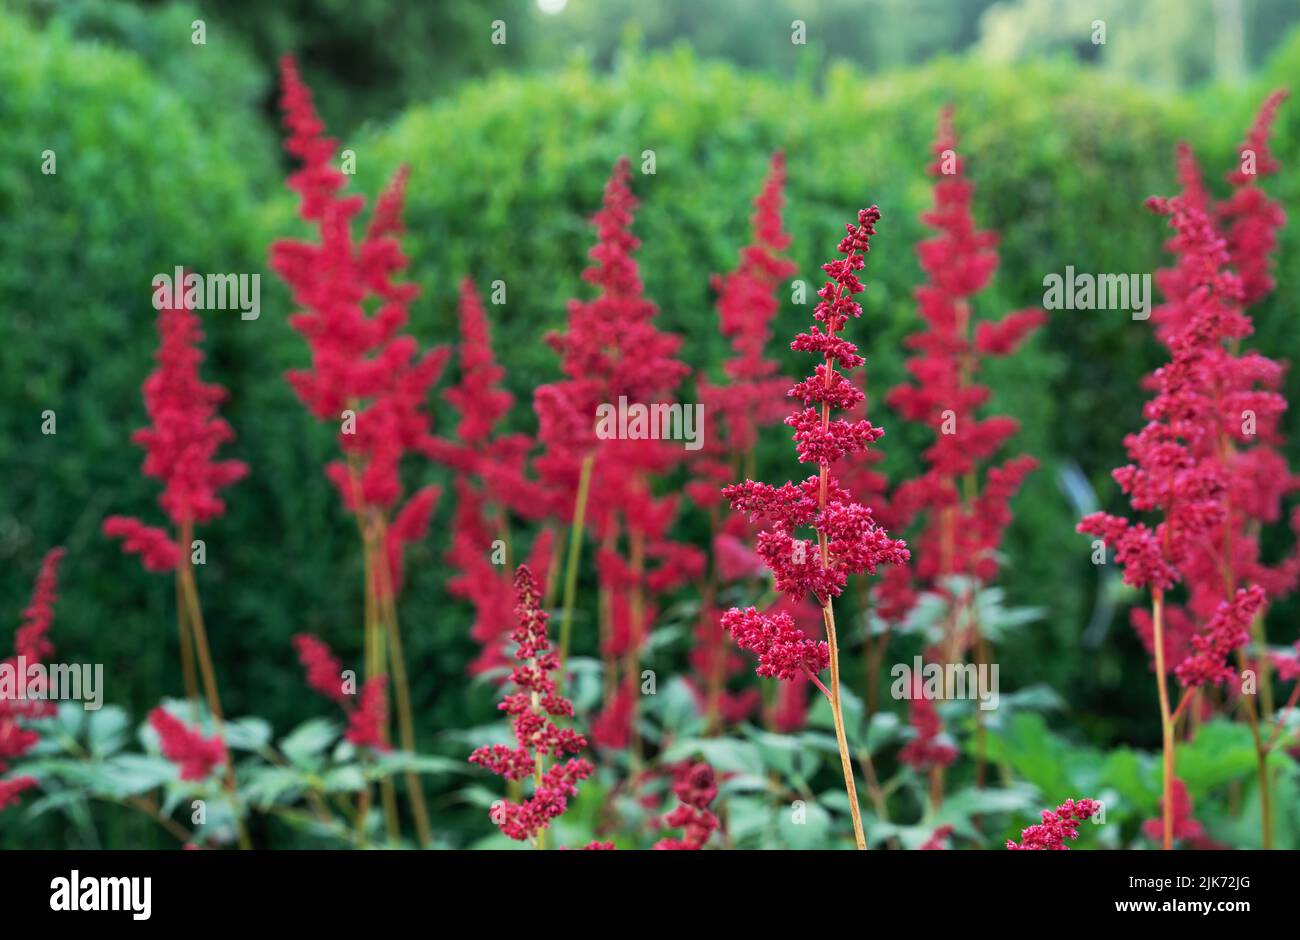 Red Astilba Japanese (lat. Astilbe japonica) blooms in the summer garden. Stock Photo